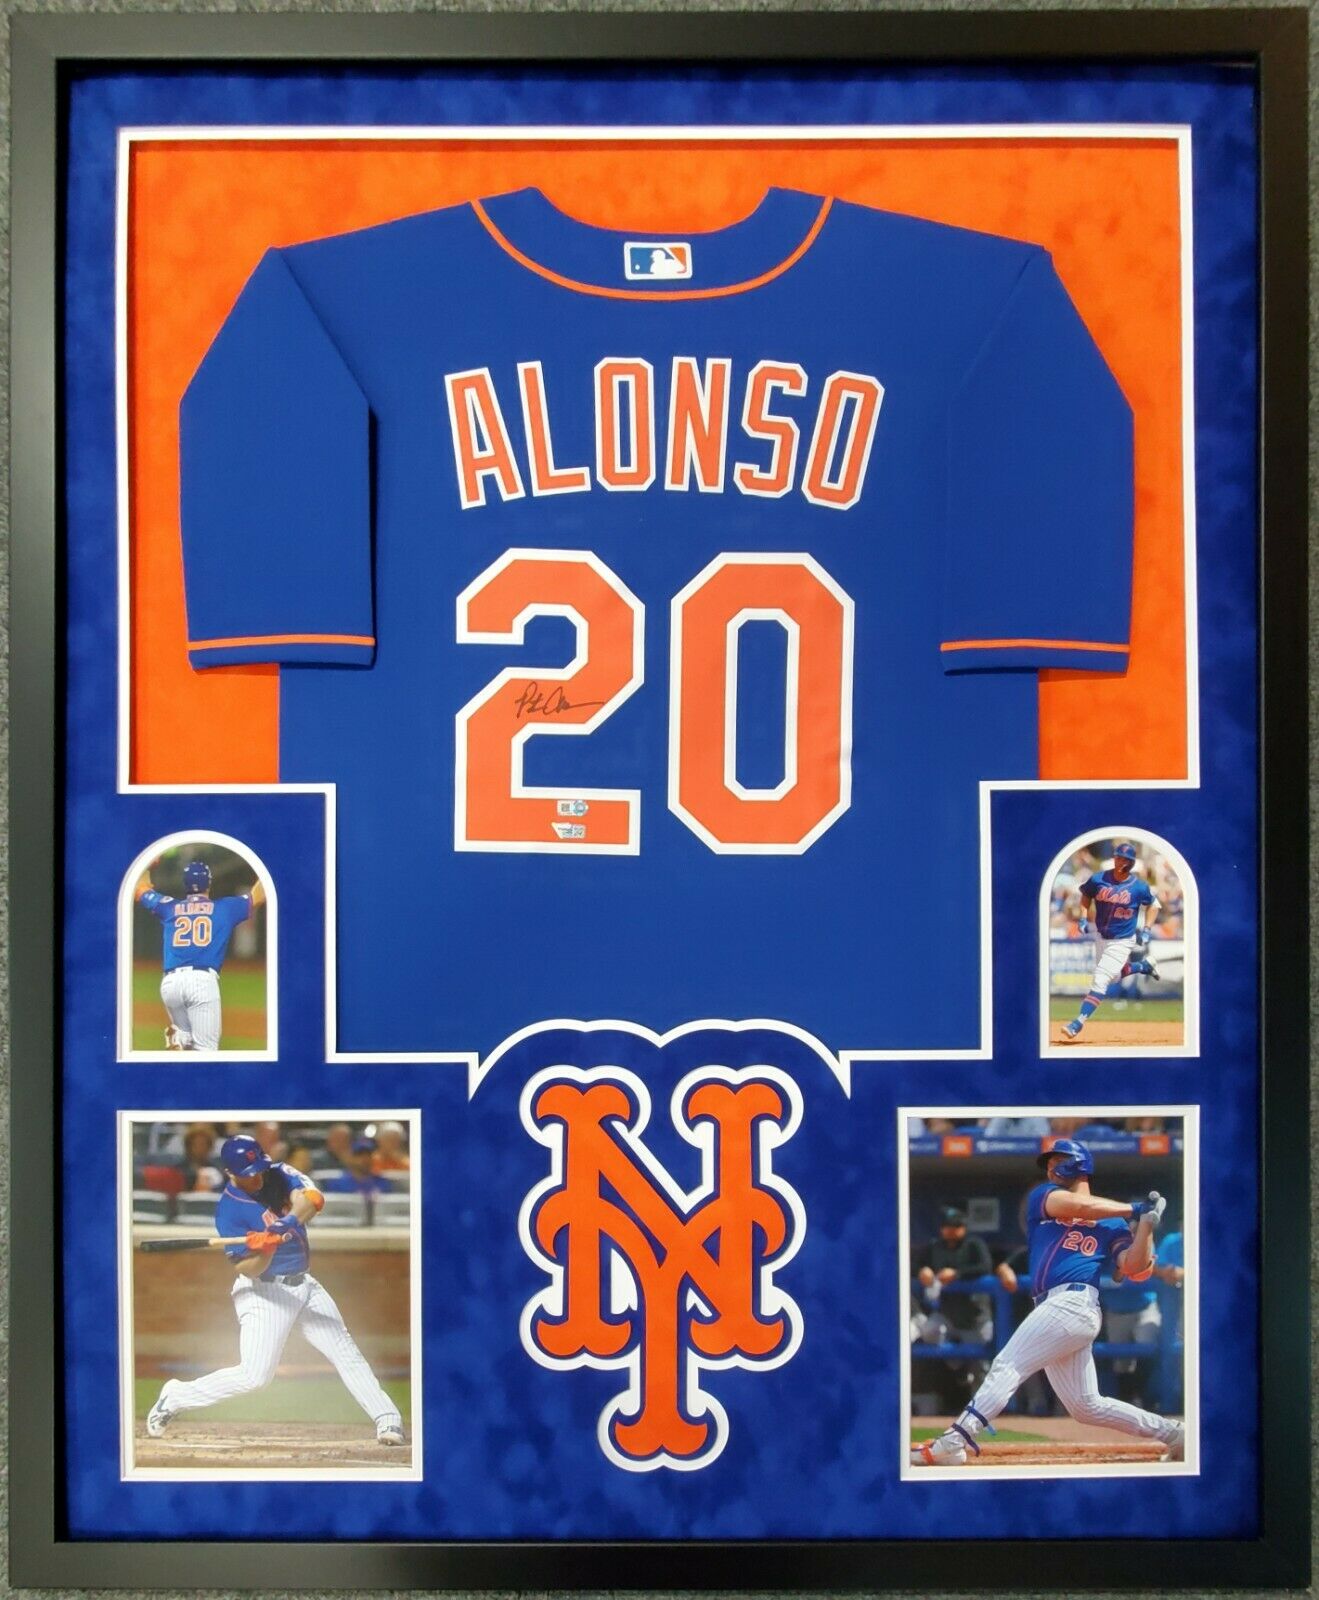 authentic pete alonso jersey